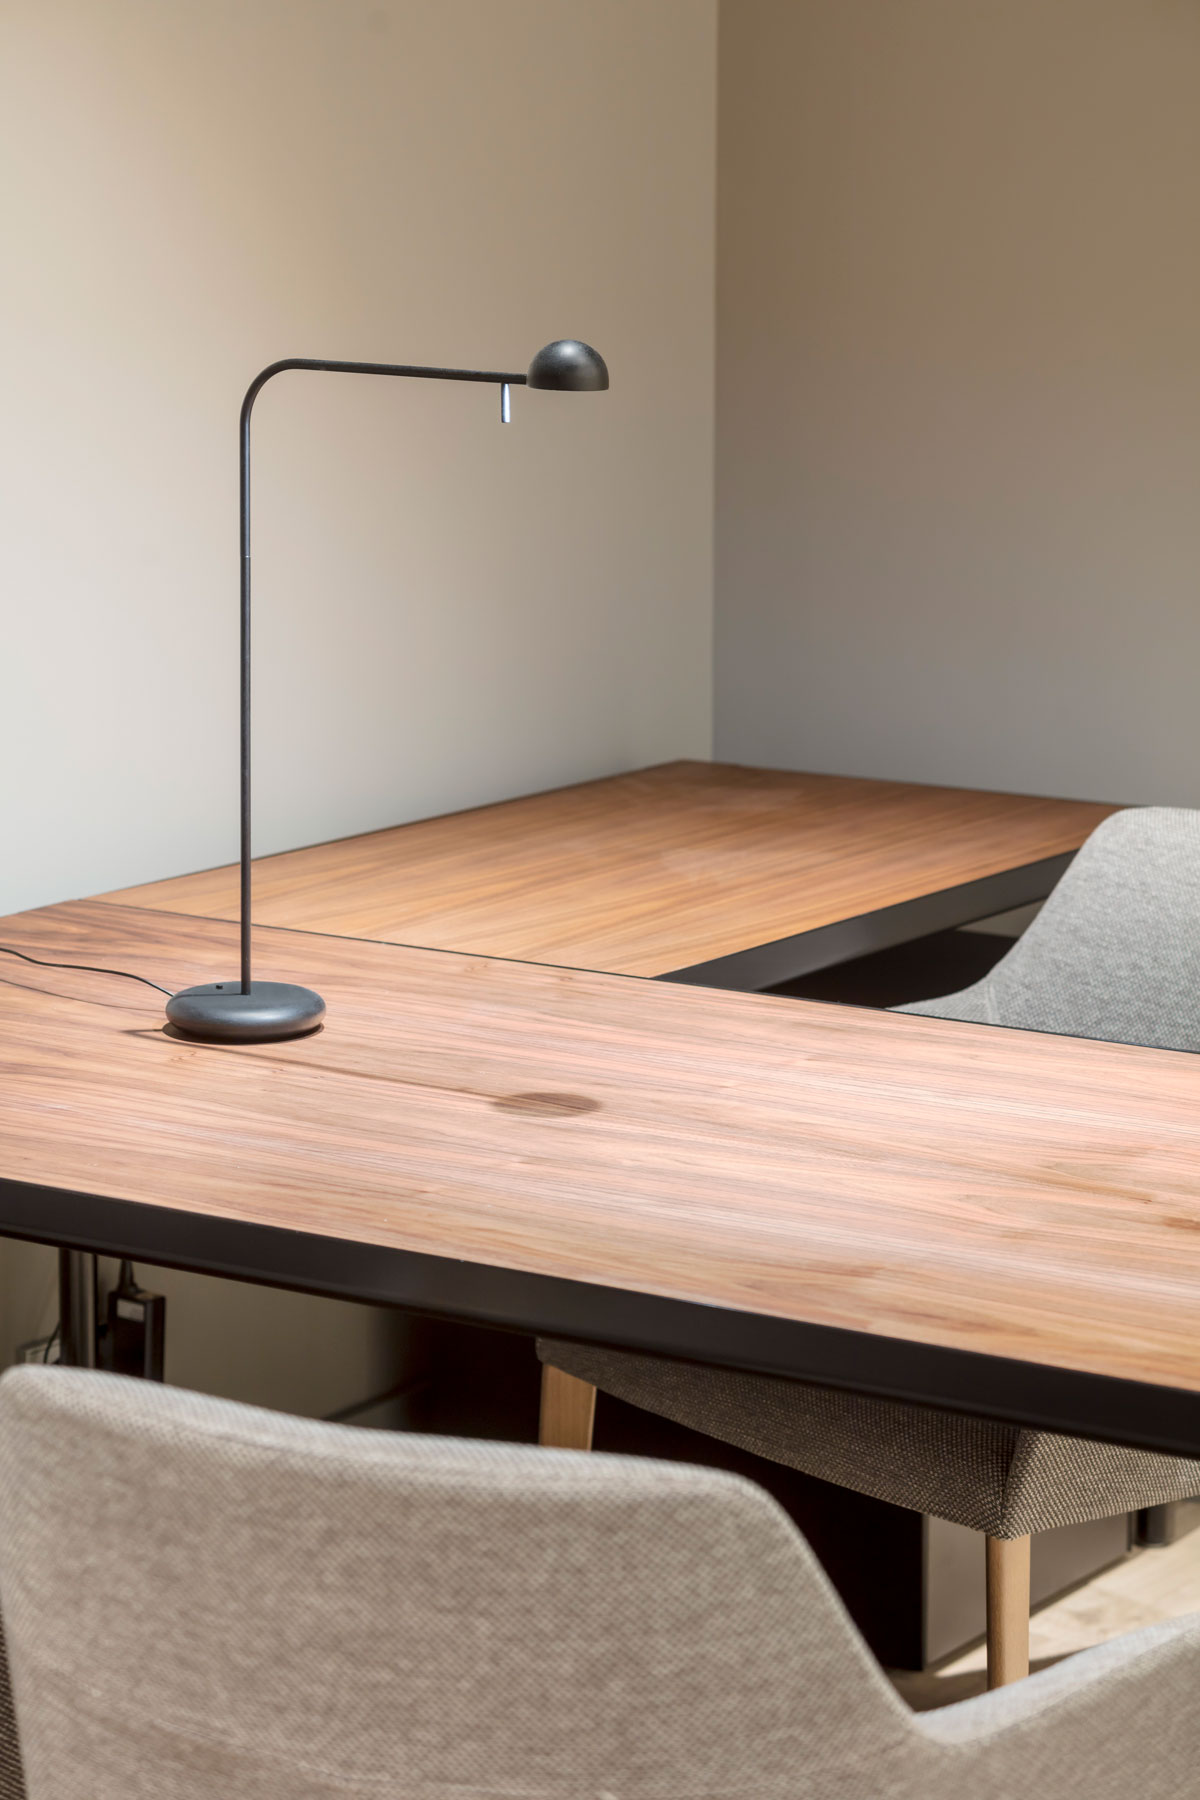 Vibia The Edit - Barcelona Design Team Selects Vibia Lighting for a Fin-de-Siècle Office Space - Pin